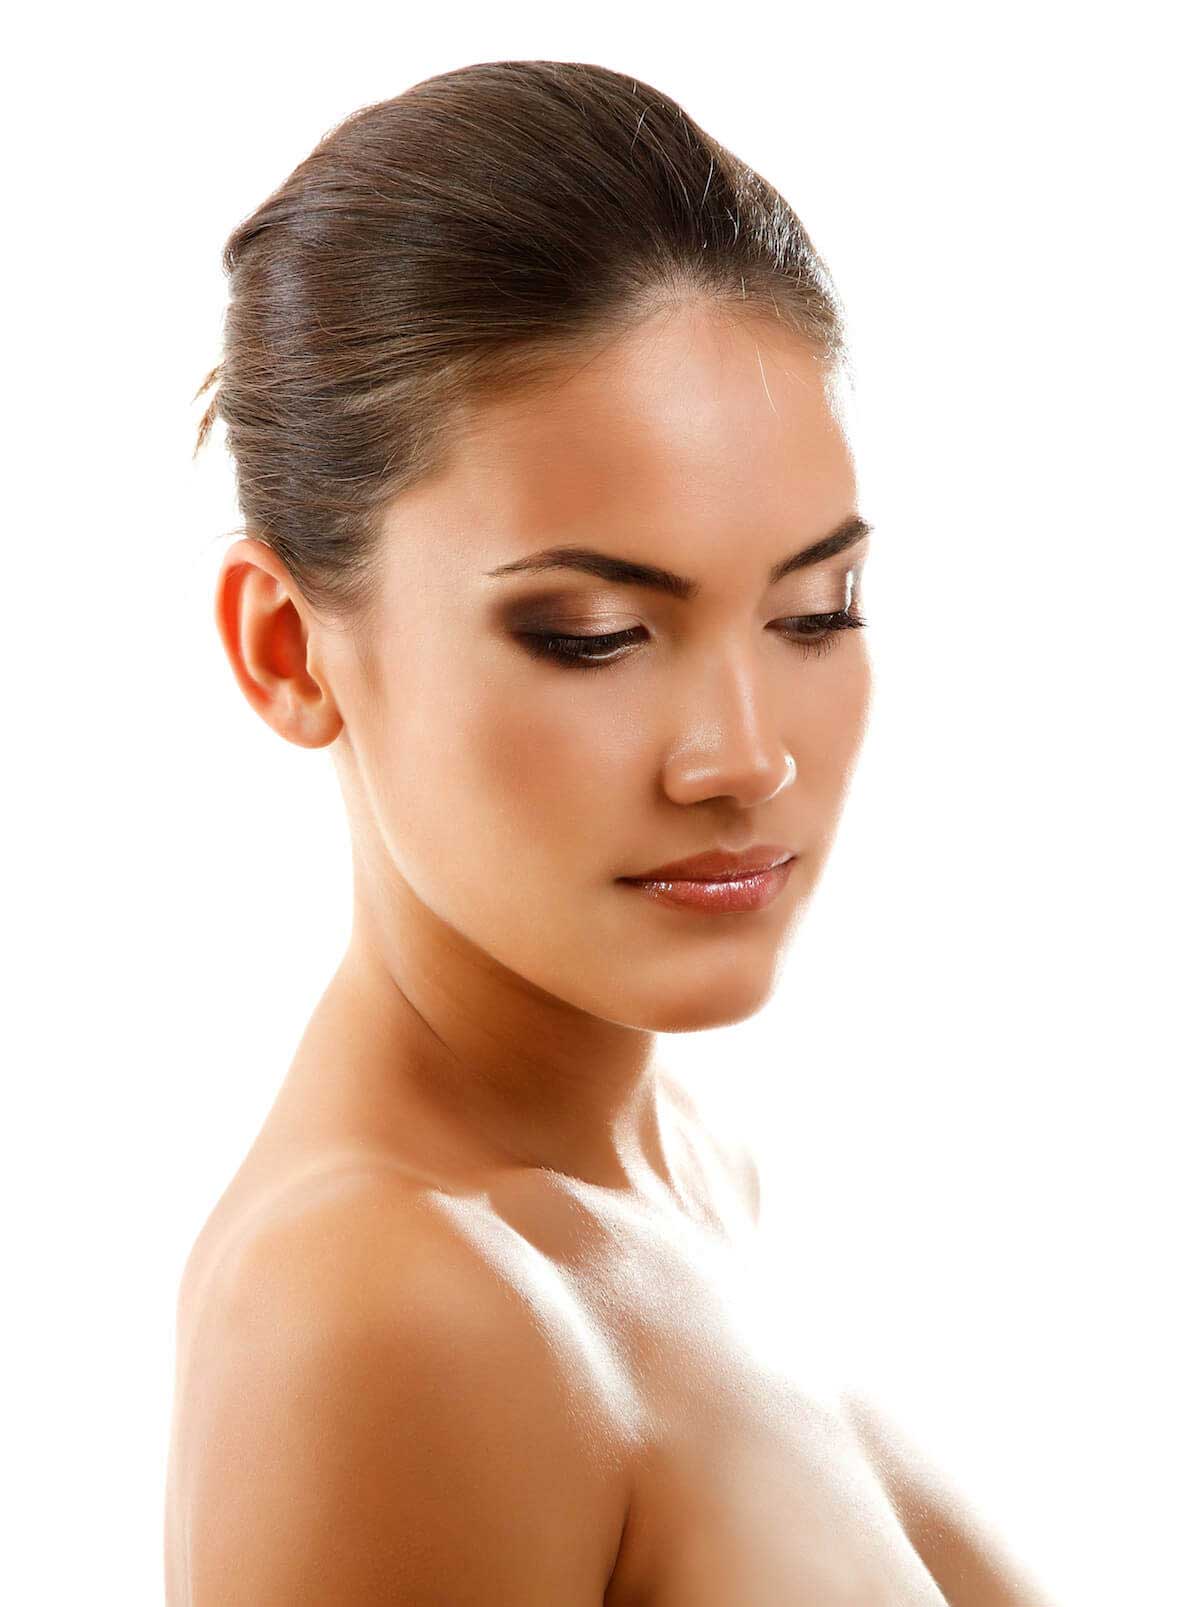 Our Face and Beauty Treatments in NJ